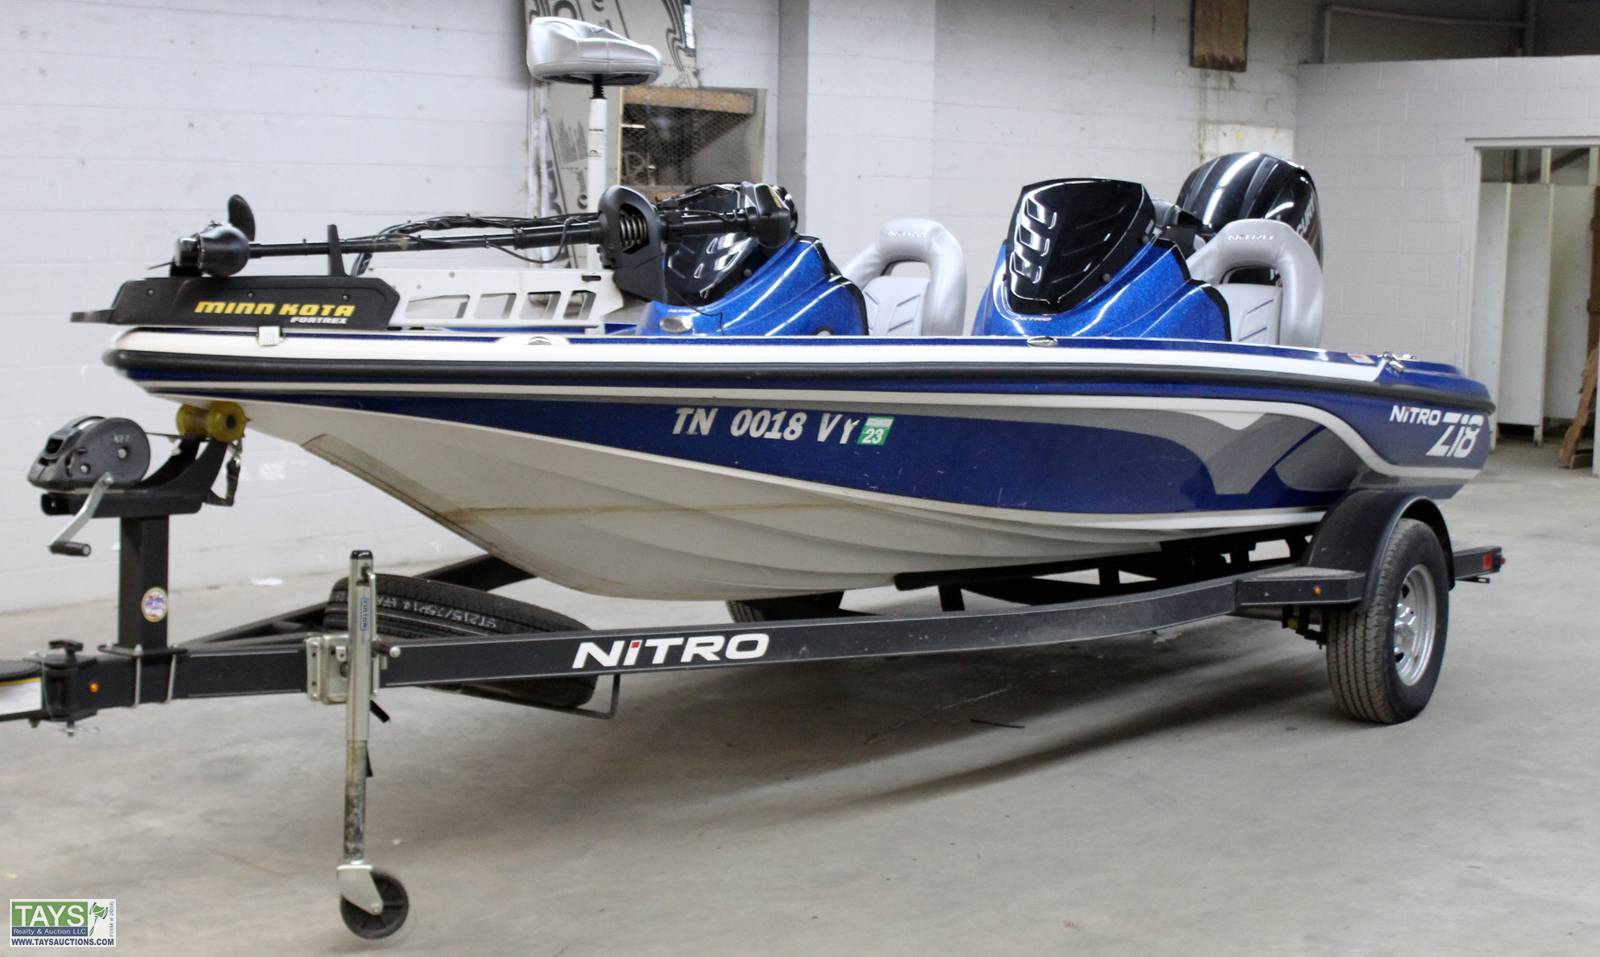 Tays Realty & Auction - Auction: ONLINE ABSOLUTE & BANKRUPTCY AUCTION:  VEHICLES • BOAT • TRACTOR • TOOLS • HVAC EQUIP • NEW SMALL ENGINE PARTS  ITEM: 2017 Z18 Nitro 18' Bass Boat